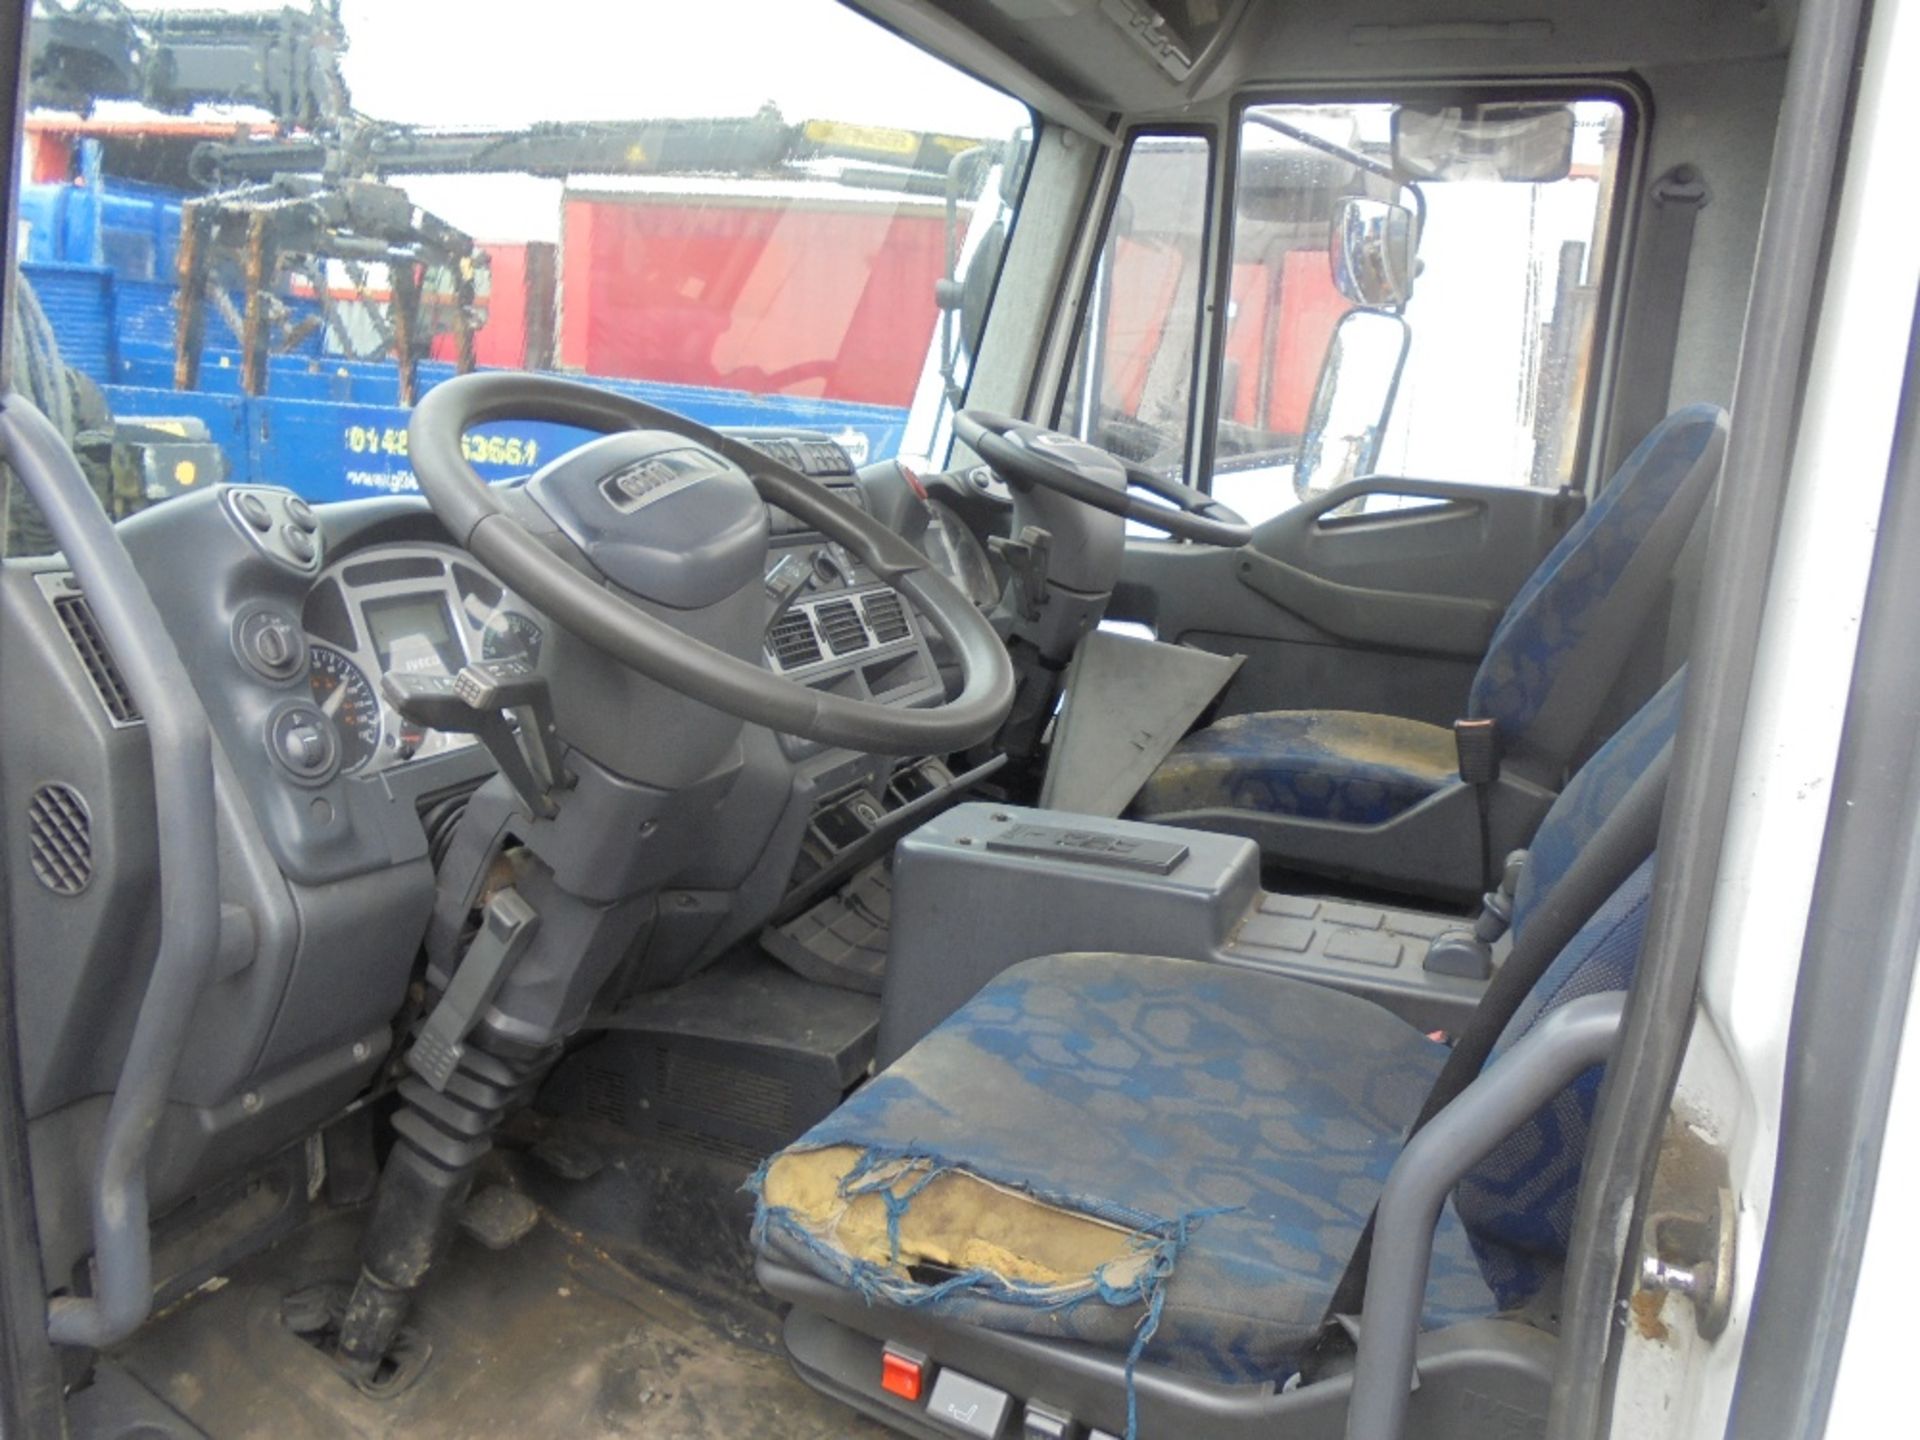 Iveco 150E21 Dual Steer Chassis Cab, Registration No. RX05 NVF, First Registered: 04/04/05, 185599Km - Image 3 of 3